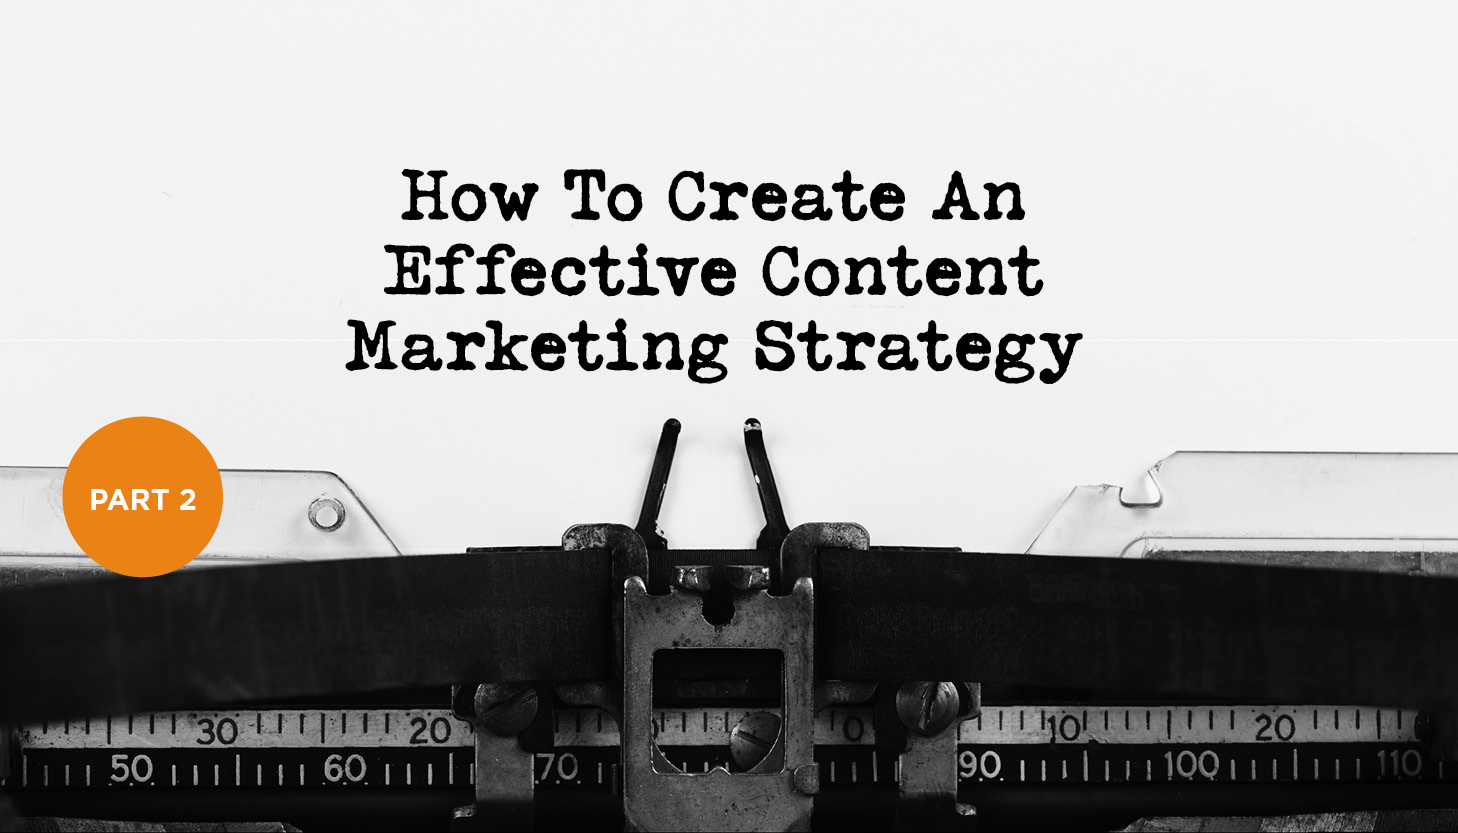 How to create an effective Content Marketing Strategy